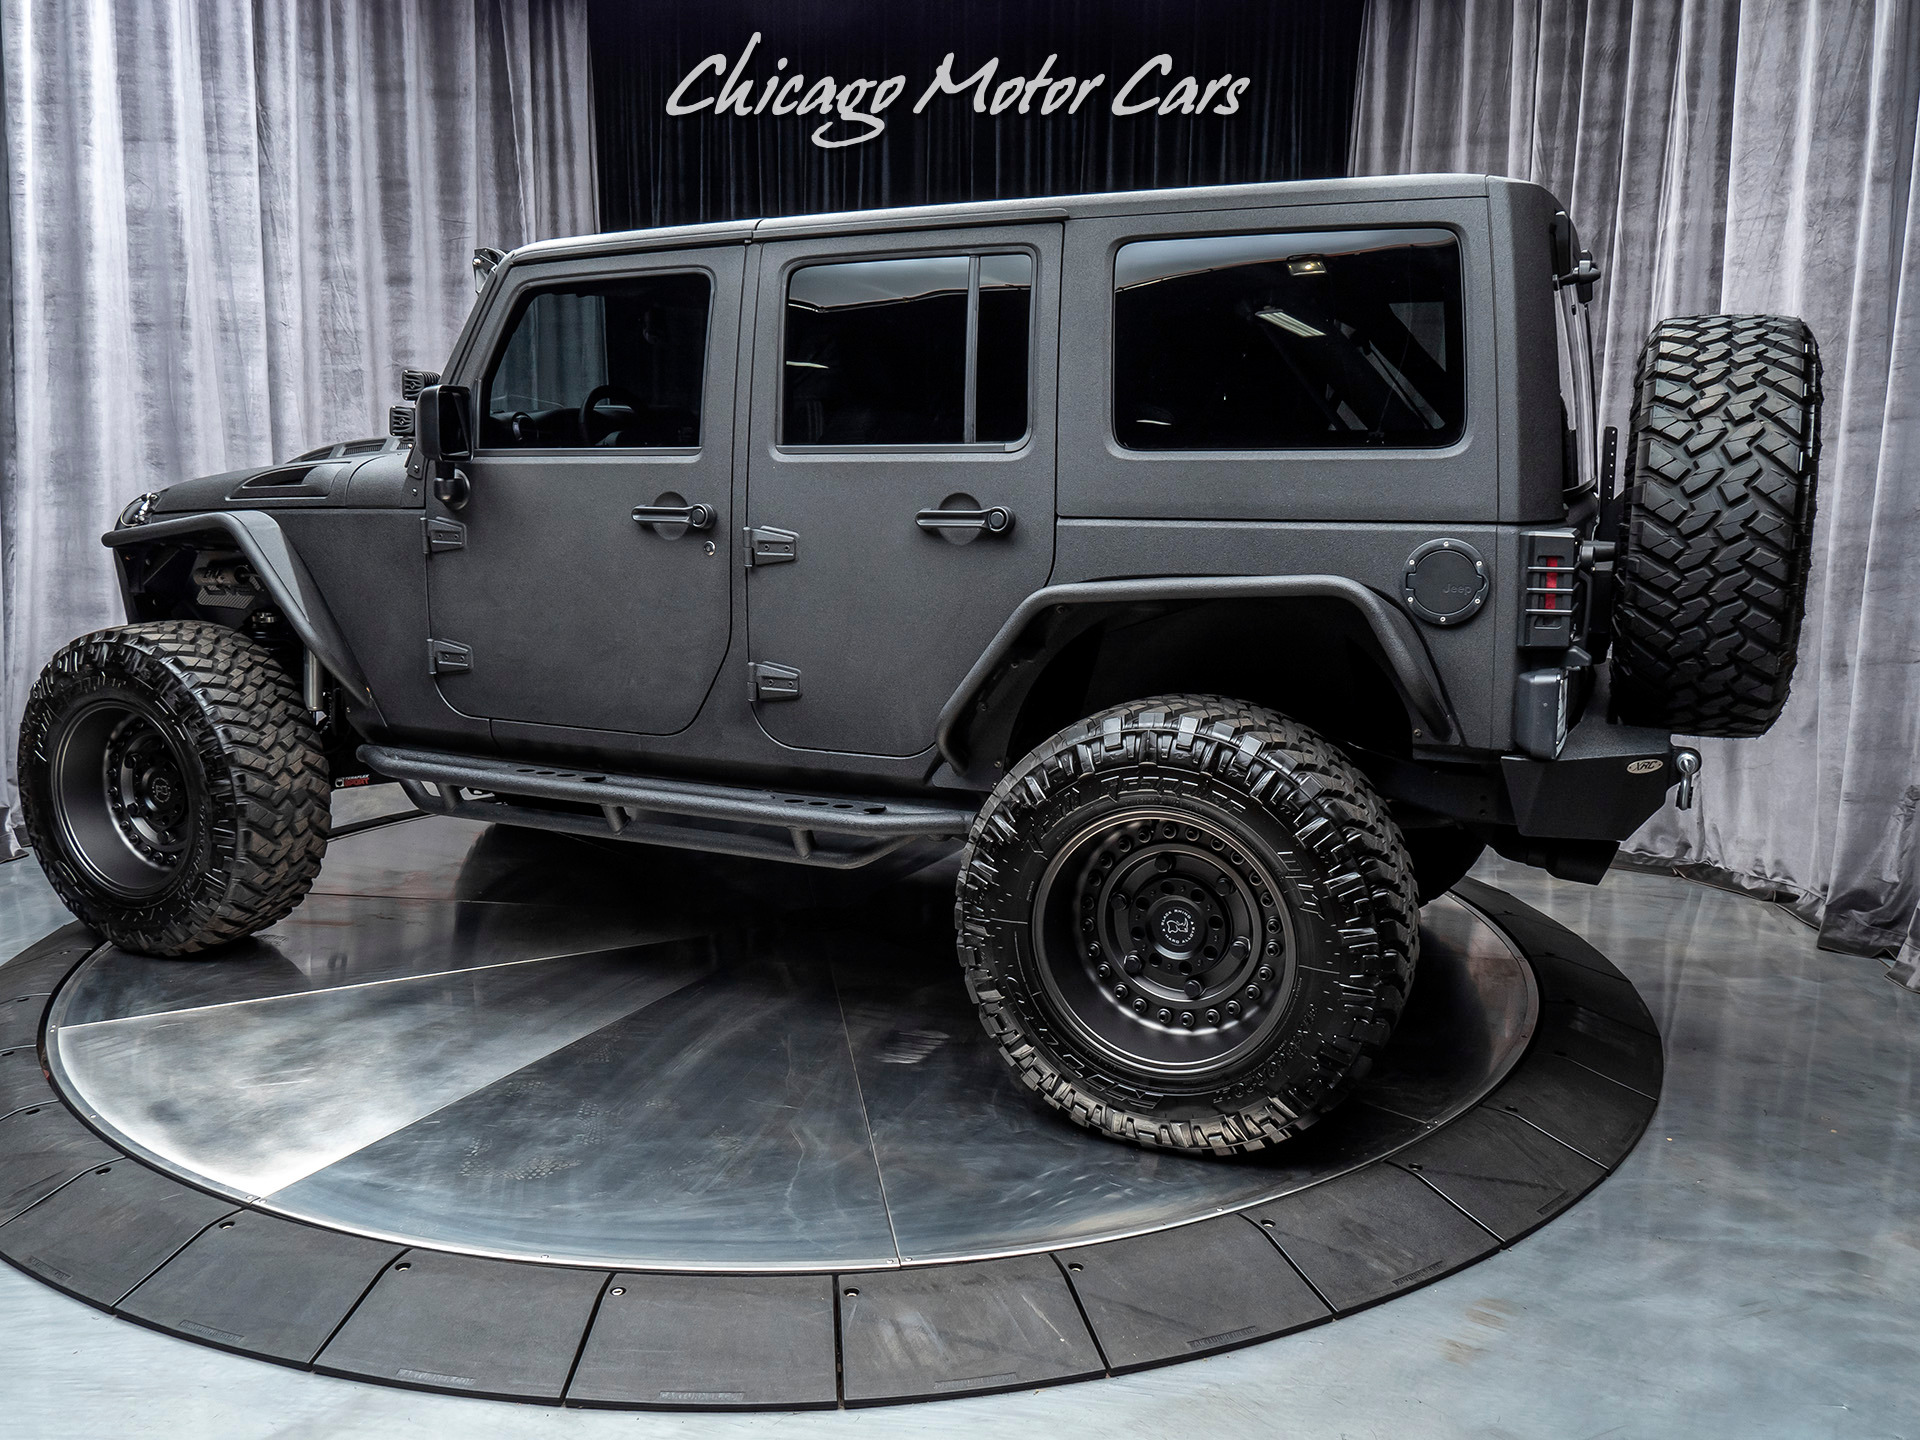 Used 2017 Jeep Wrangler Unlimited **FULLY UPGRADED** $90K+ BUILD! For Sale  (Special Pricing) | Chicago Motor Cars Stock #16047